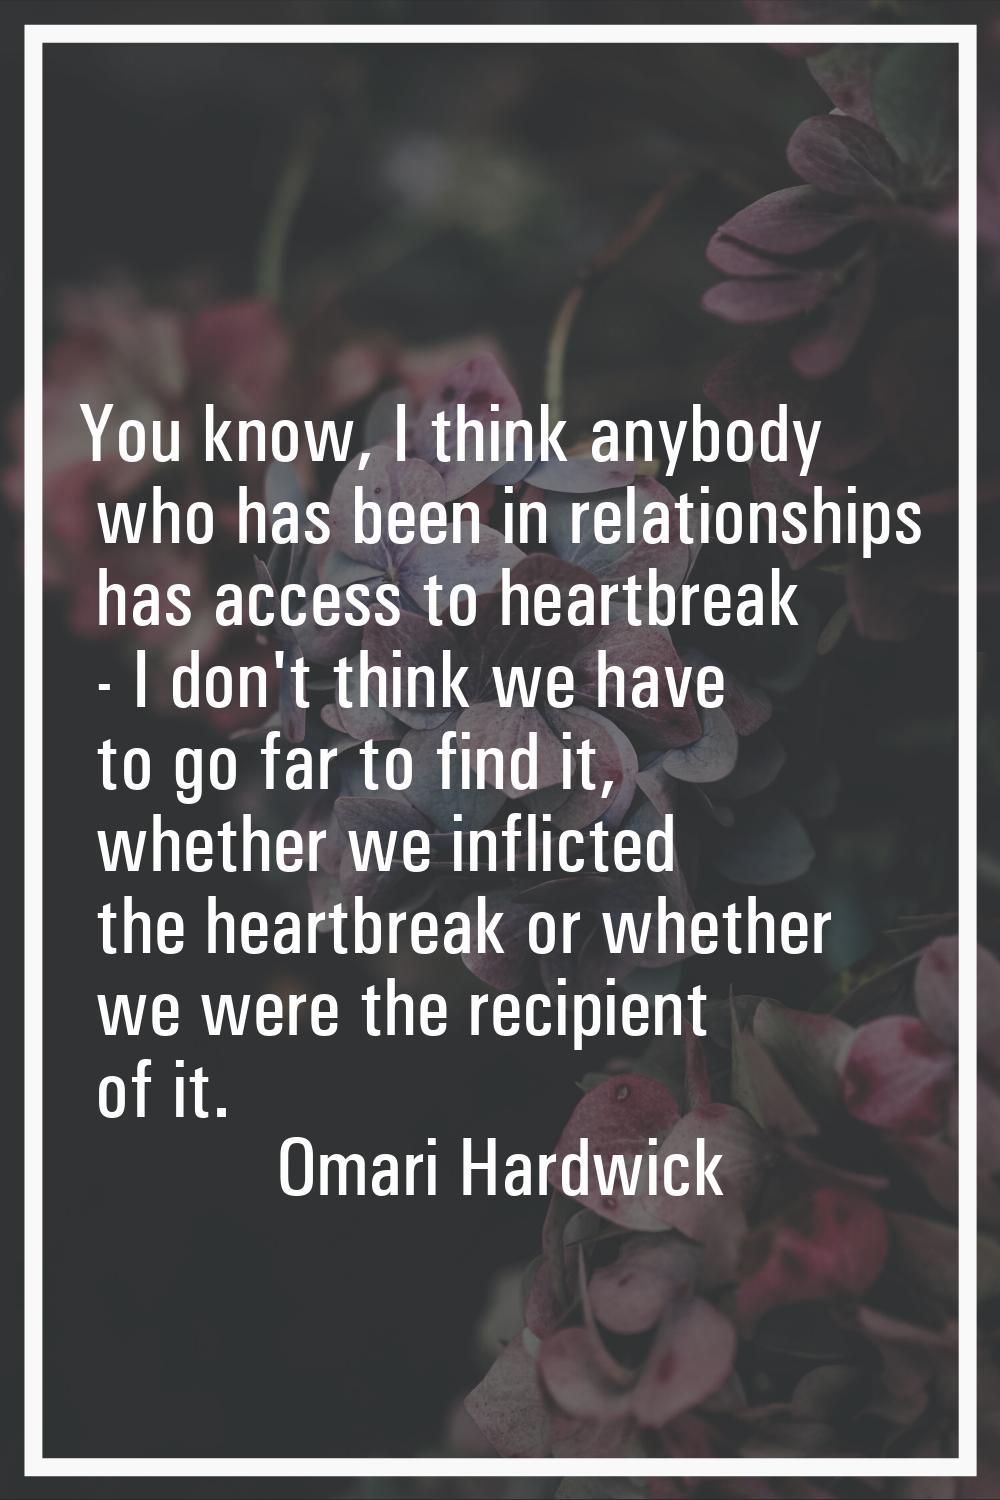 You know, I think anybody who has been in relationships has access to heartbreak - I don't think we